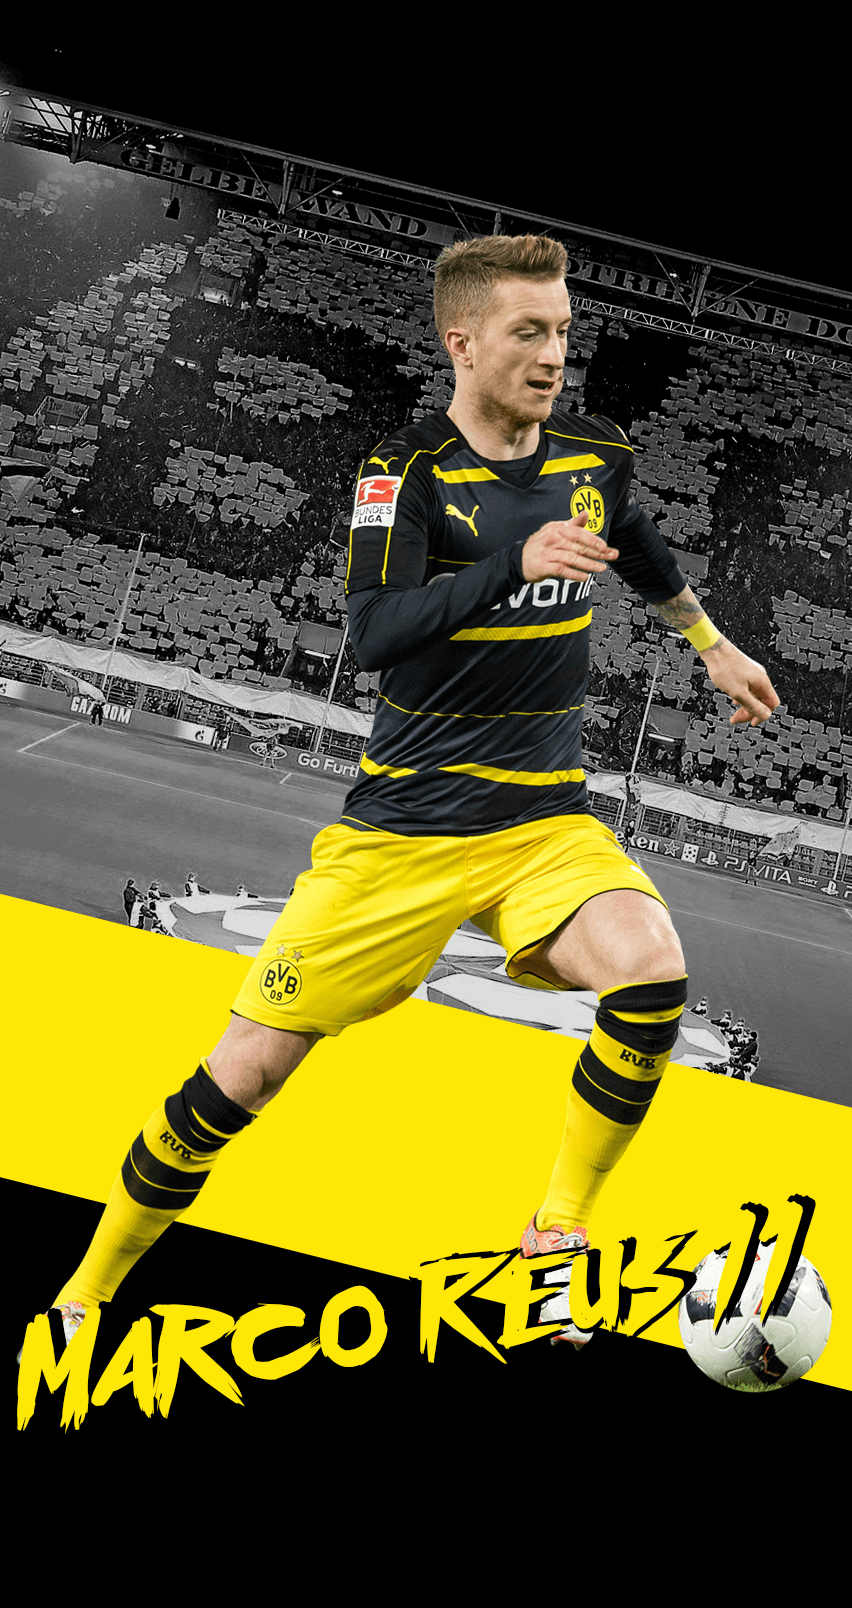 Made this iPhone wallpaper of Marco! What player should I